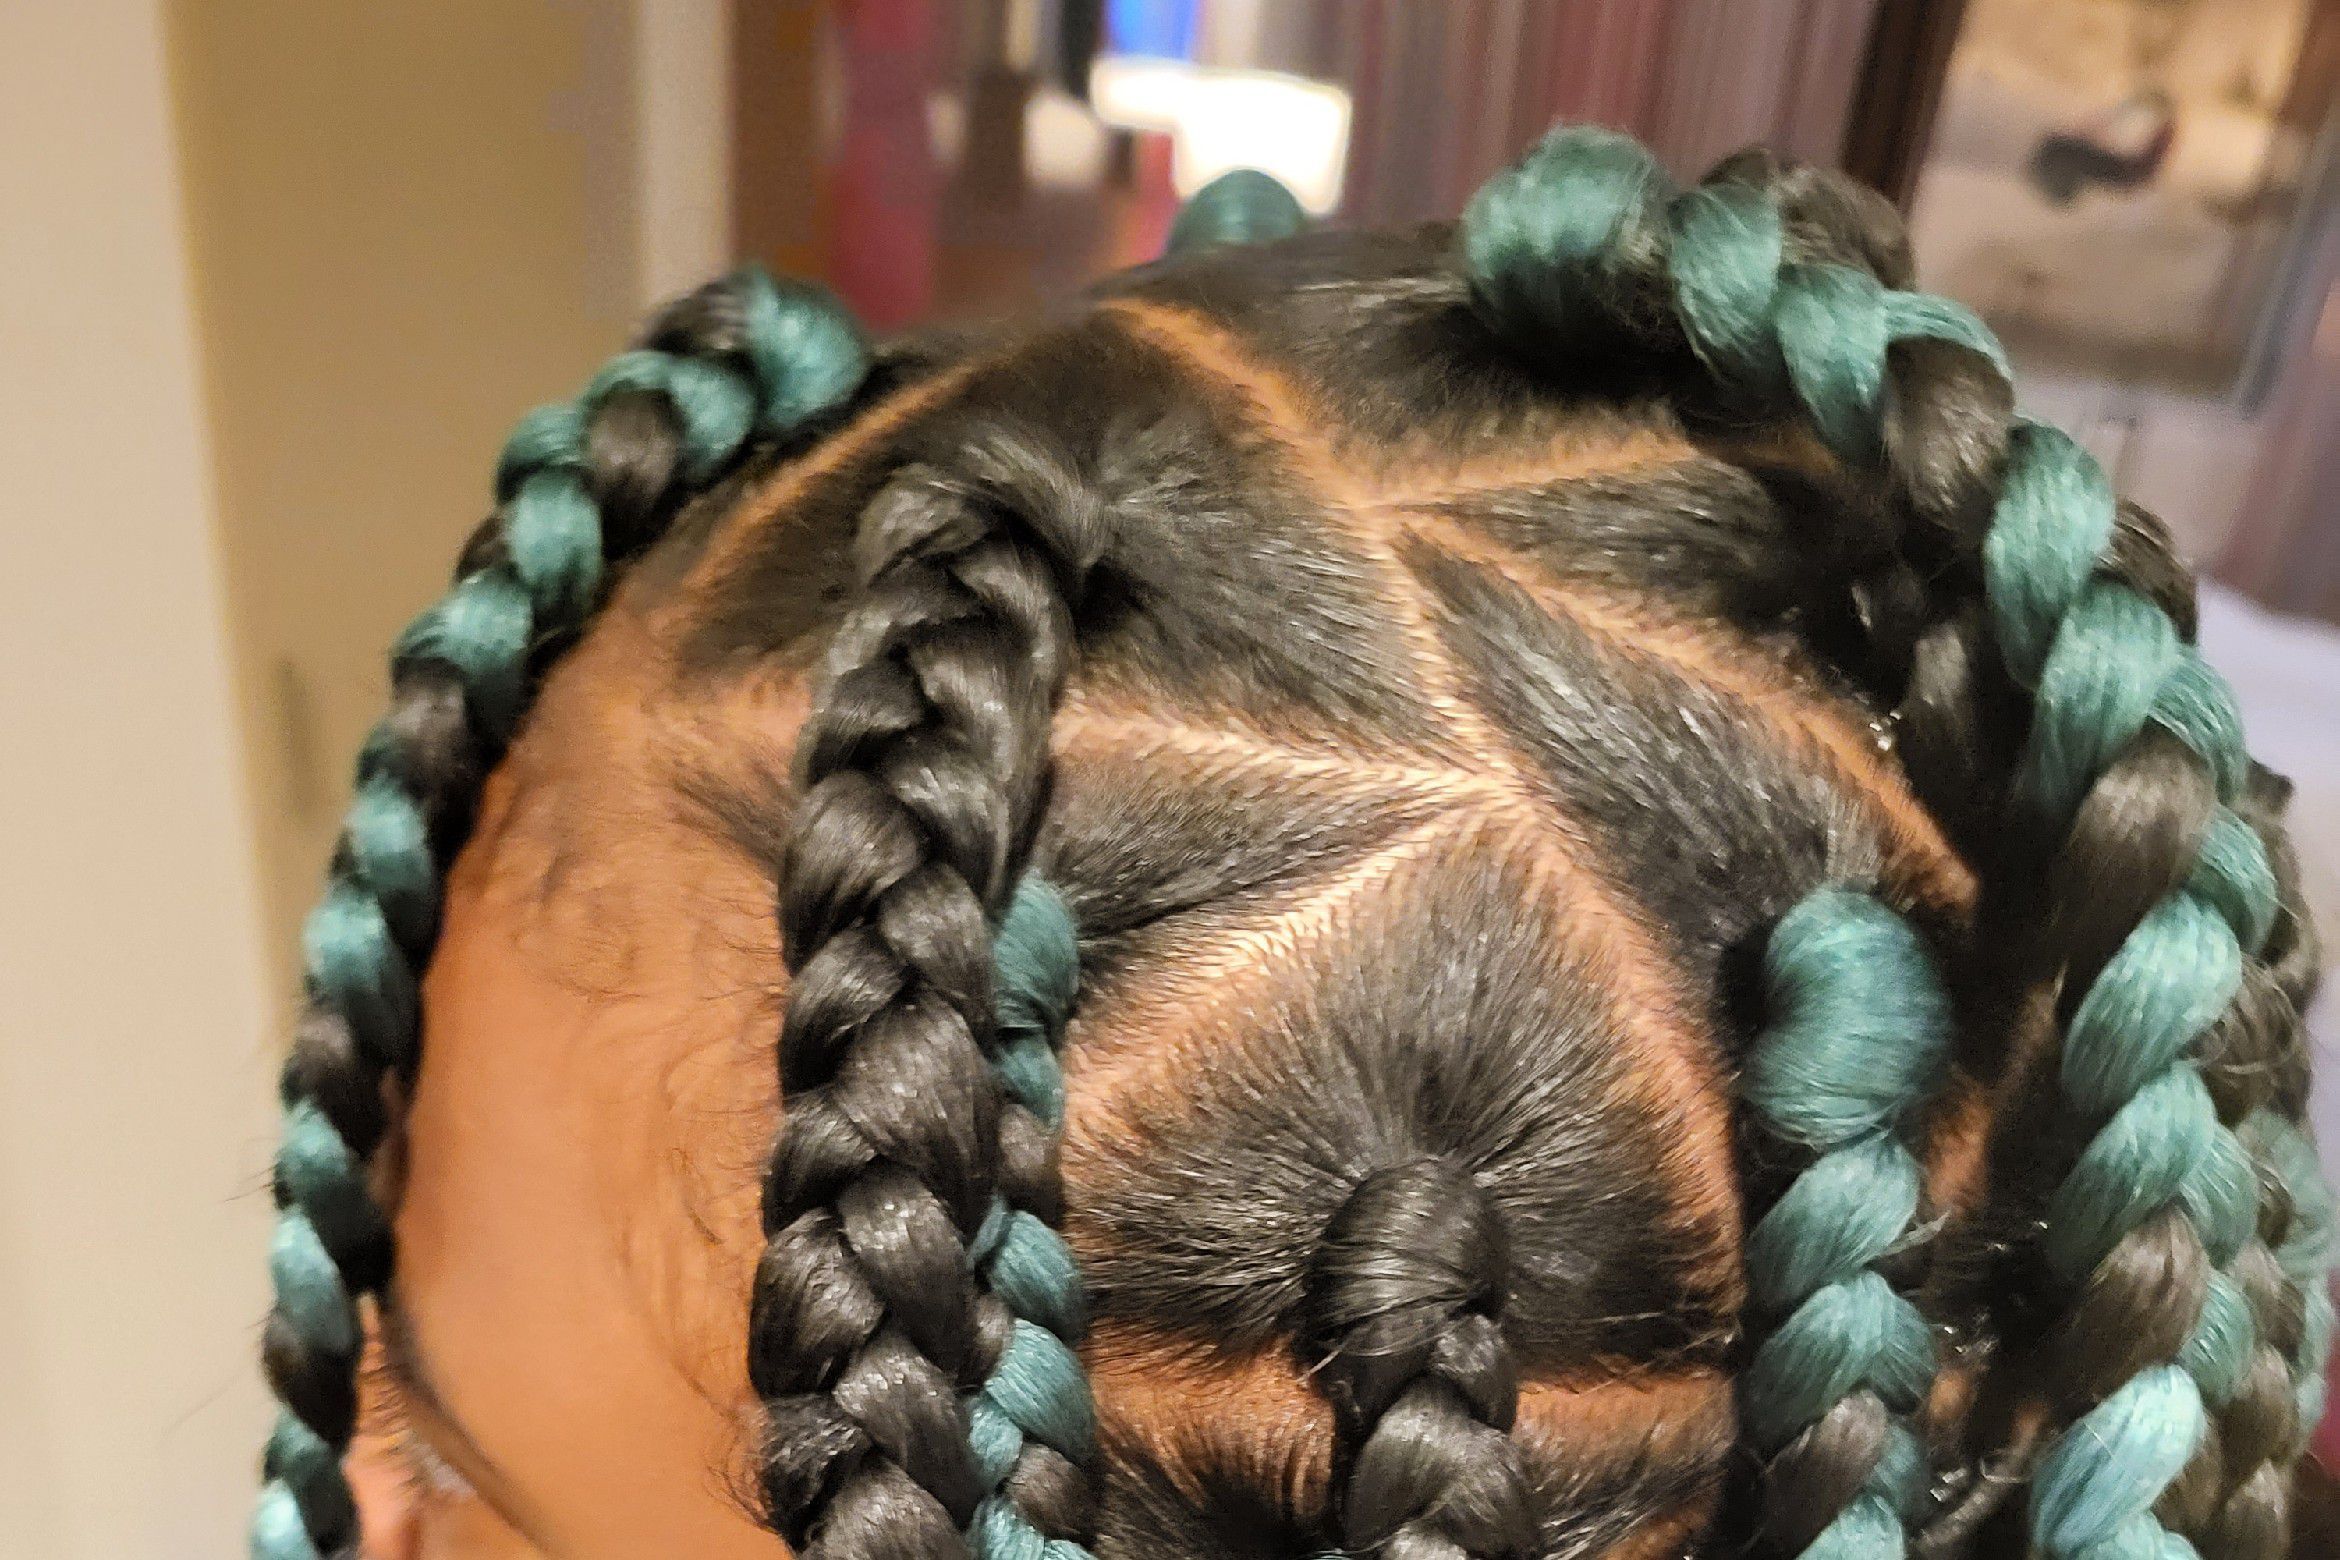 Braid Hair Extensions  Sew in Hair Extensions Near You in Dallas